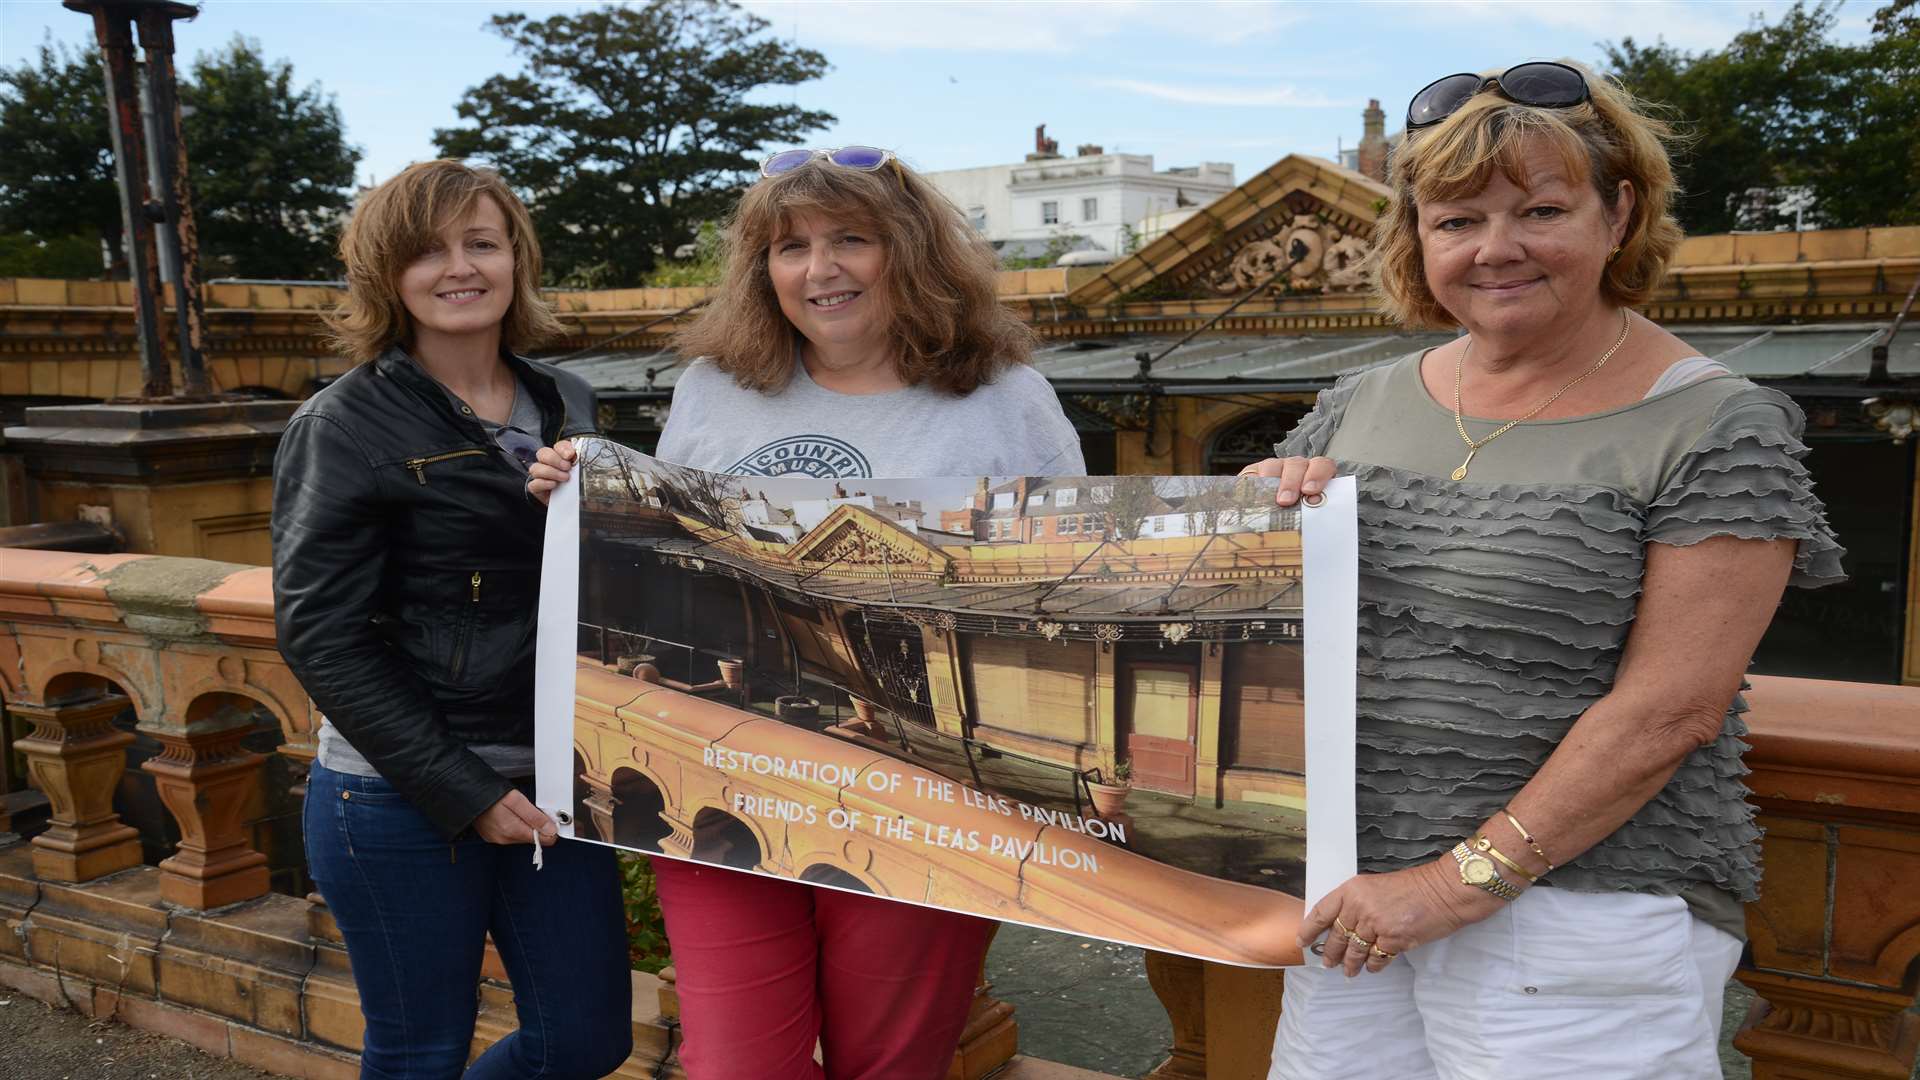 Julia Jones, Allison Glen and Liz Mulqueen from Friends of Leas Pavilion set up the Crowdfunding page.